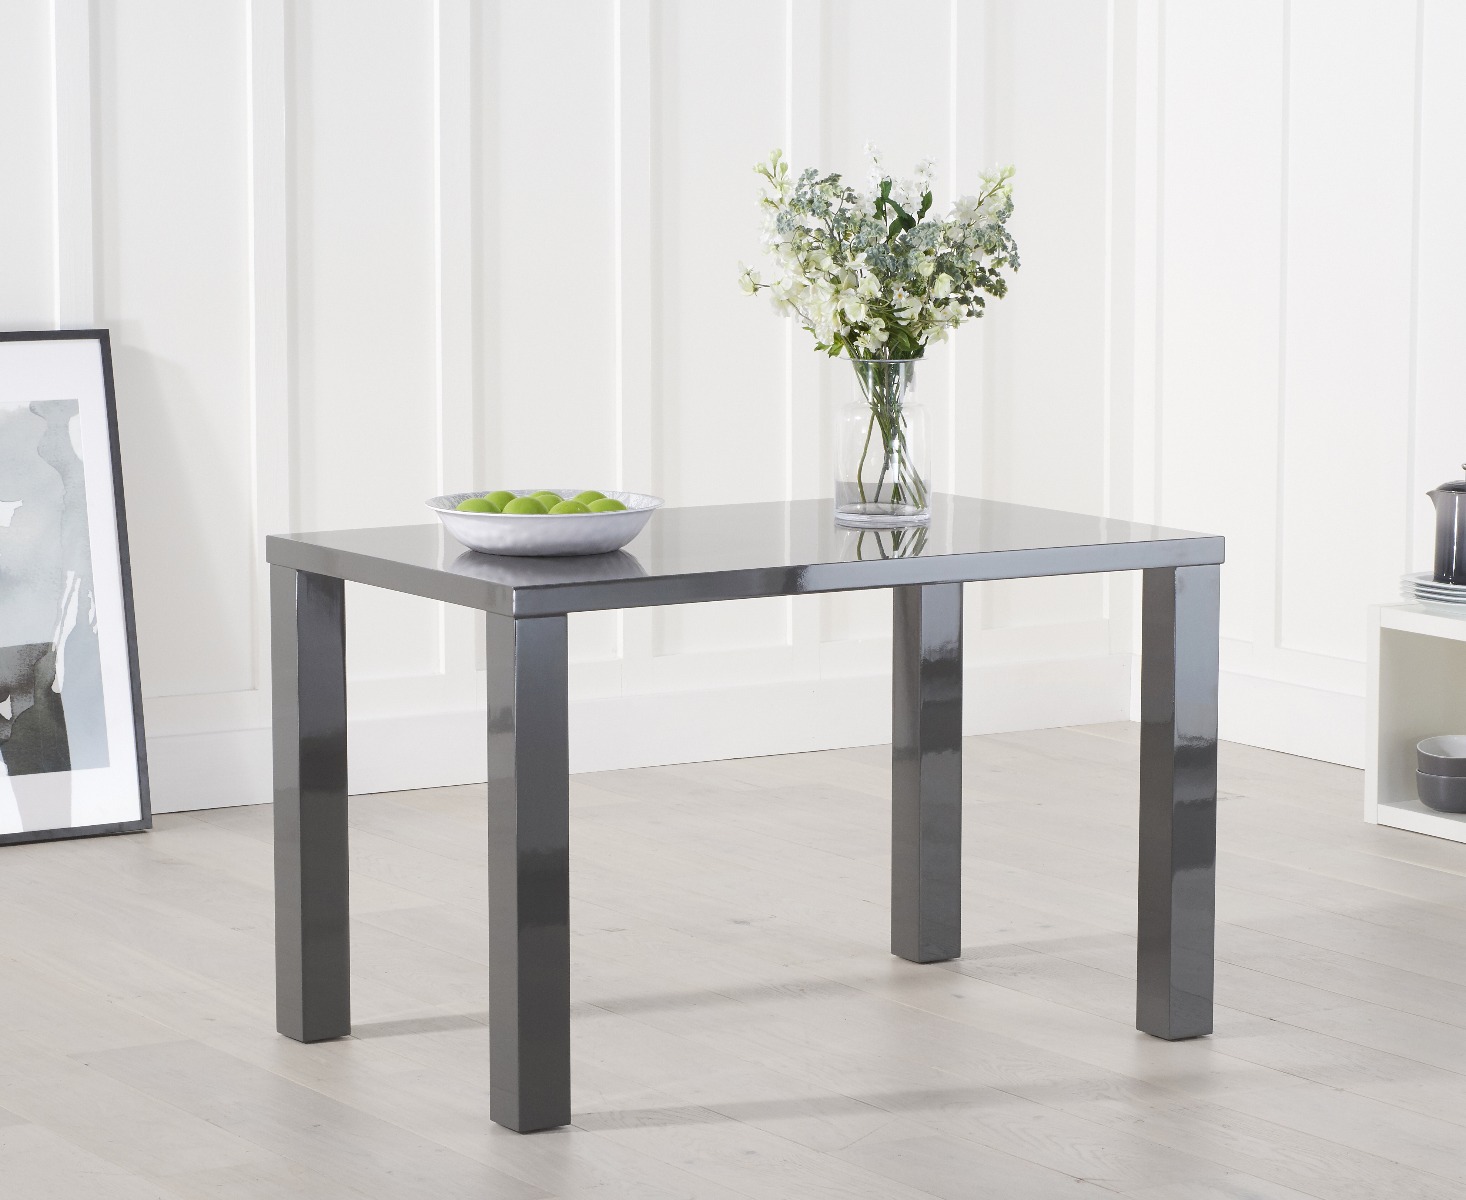 Photo 4 of Atlanta 120cm dark grey high gloss dining table with 4 grey gianni chairs